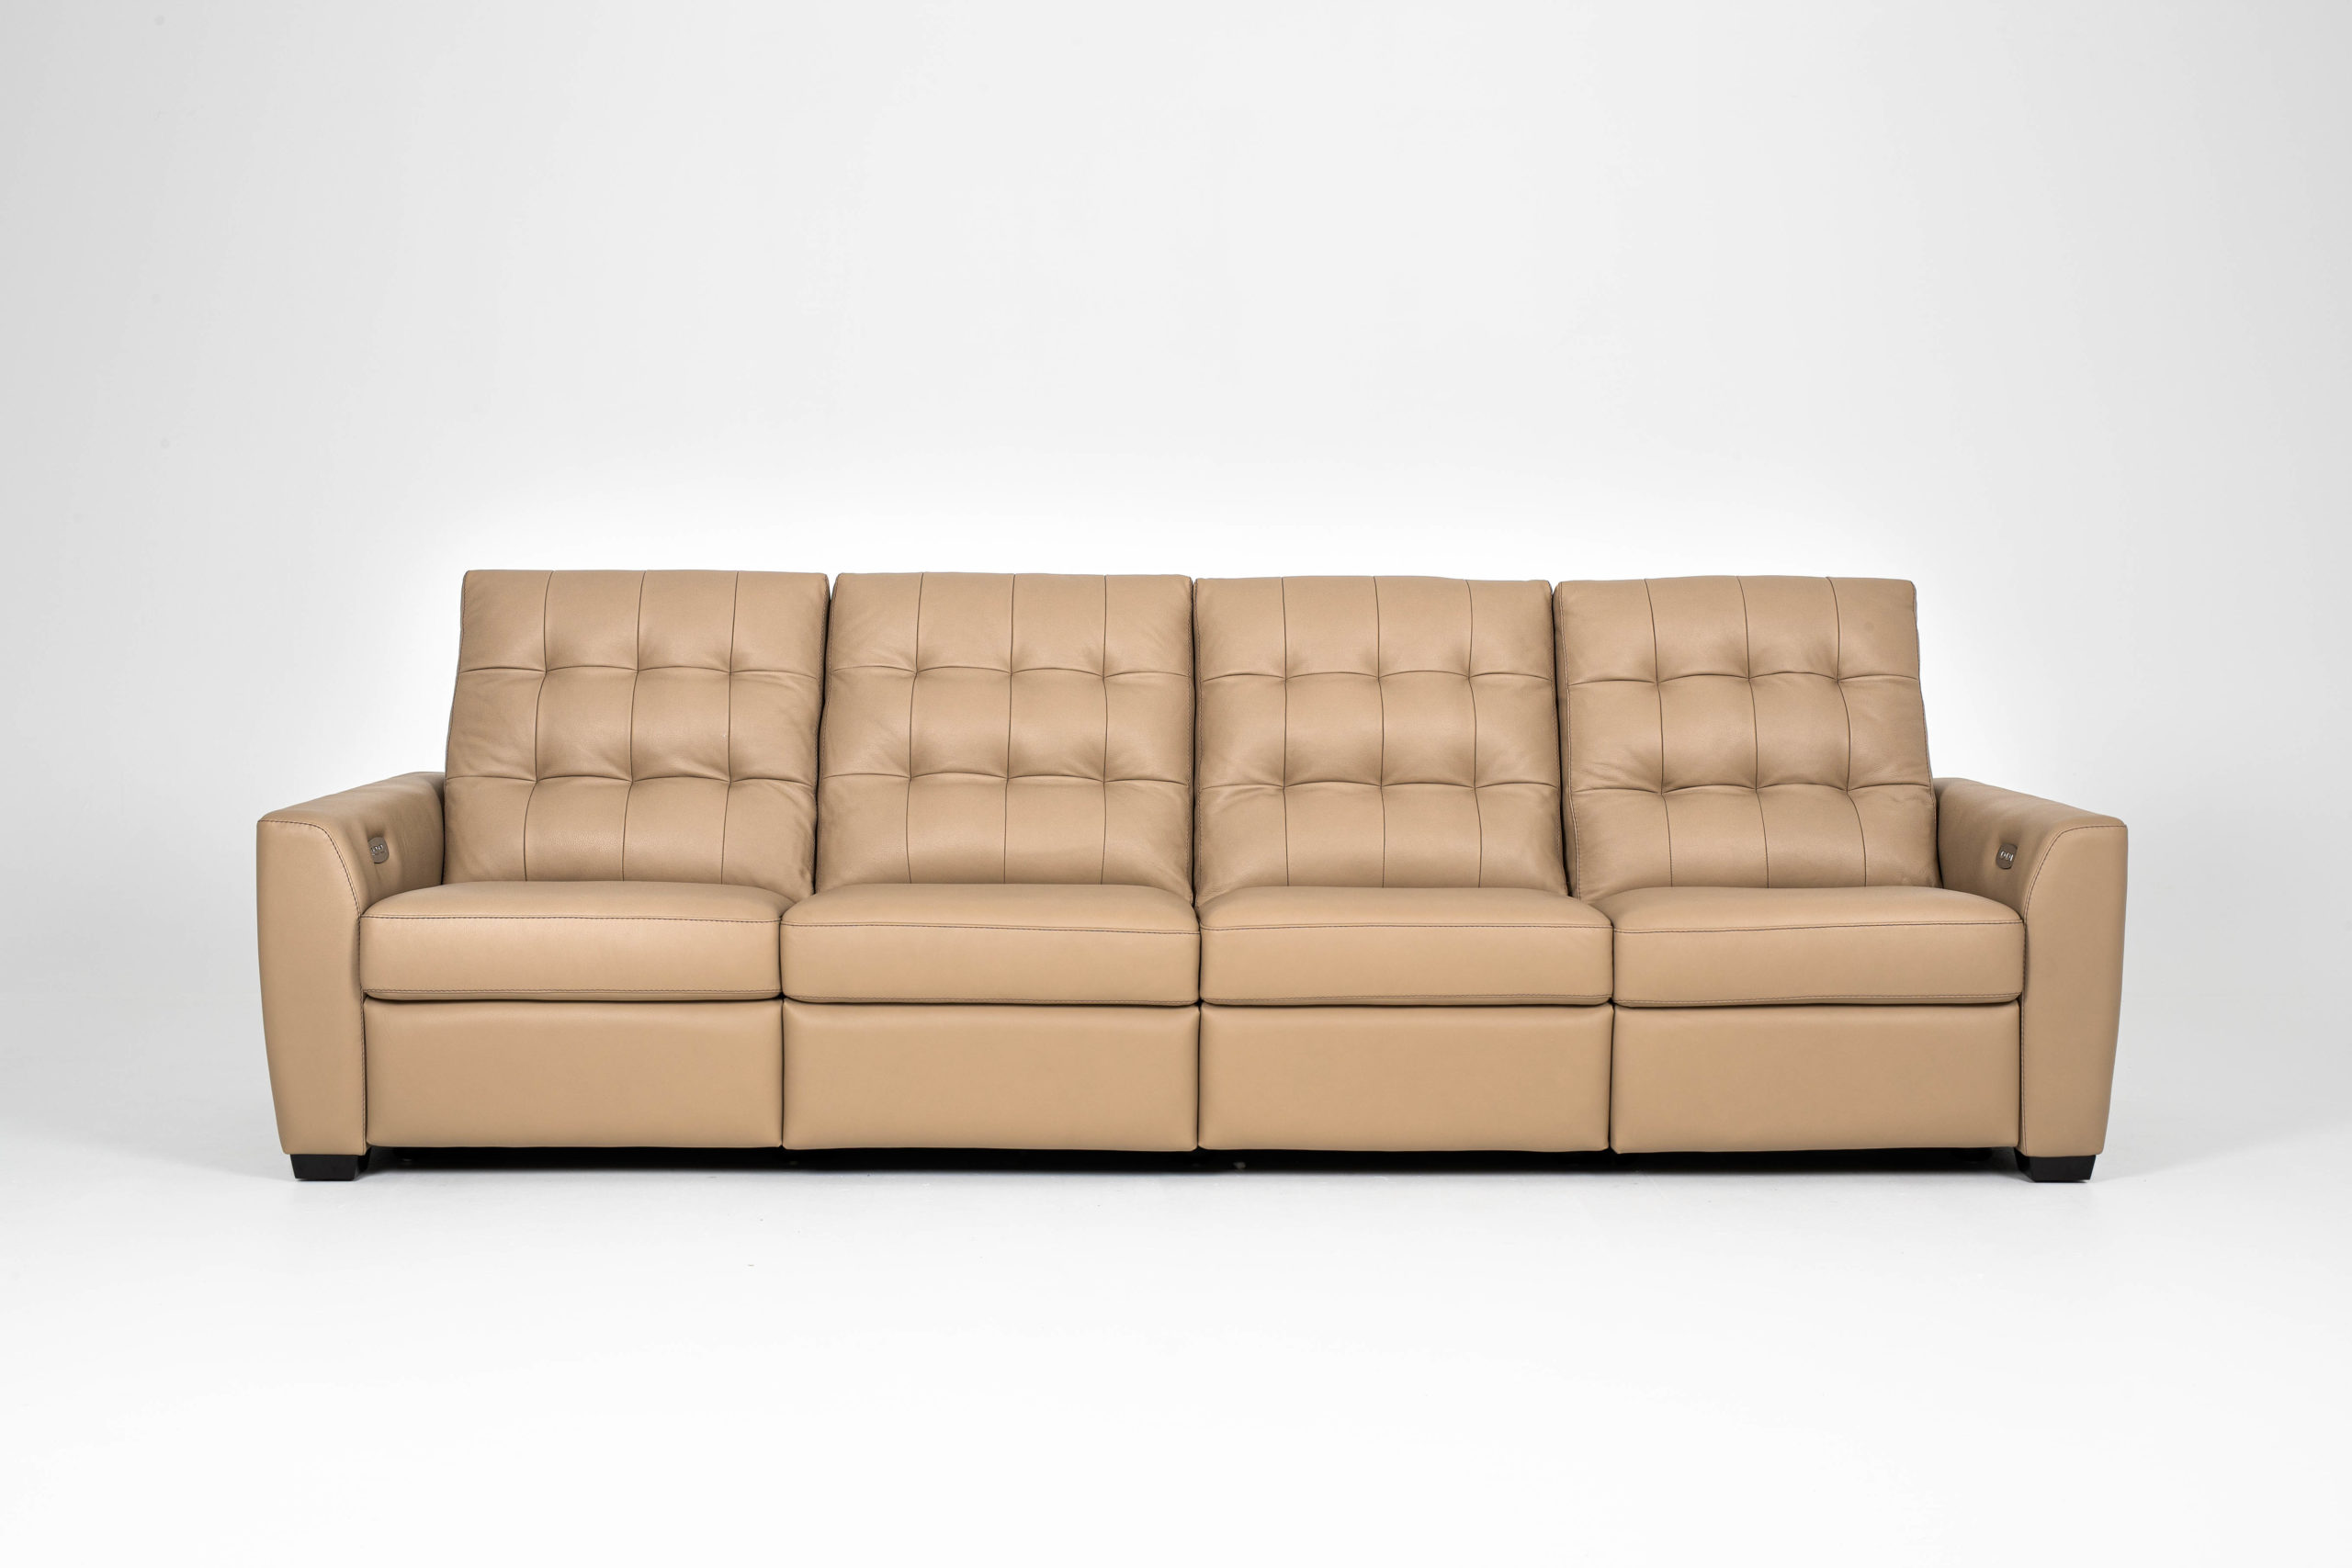 kendall four seat sofa from american leather